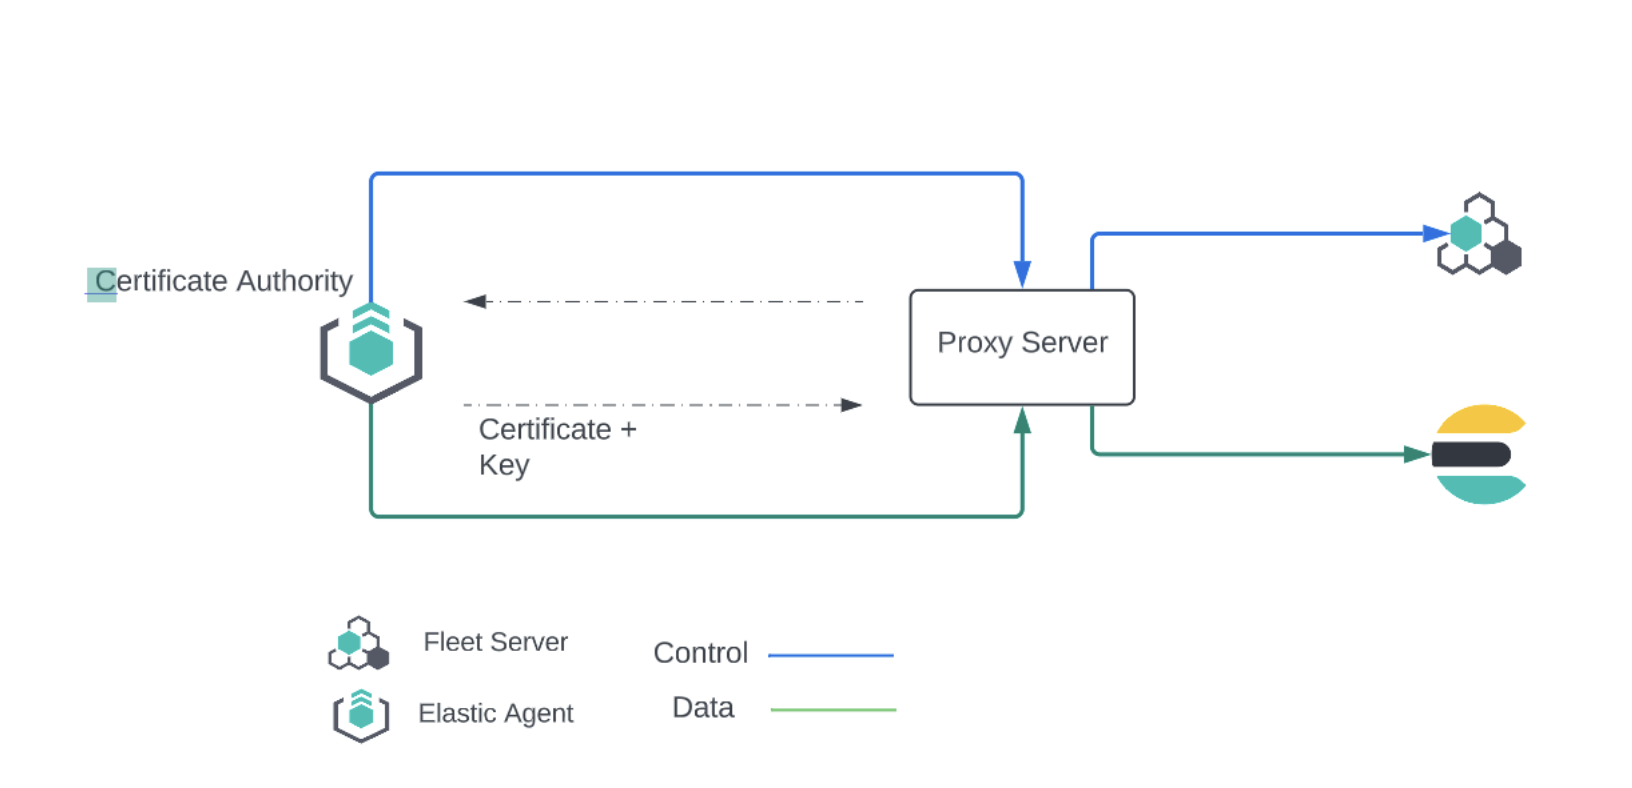 Image showing data flow between the proxy server and the Certificate Authority